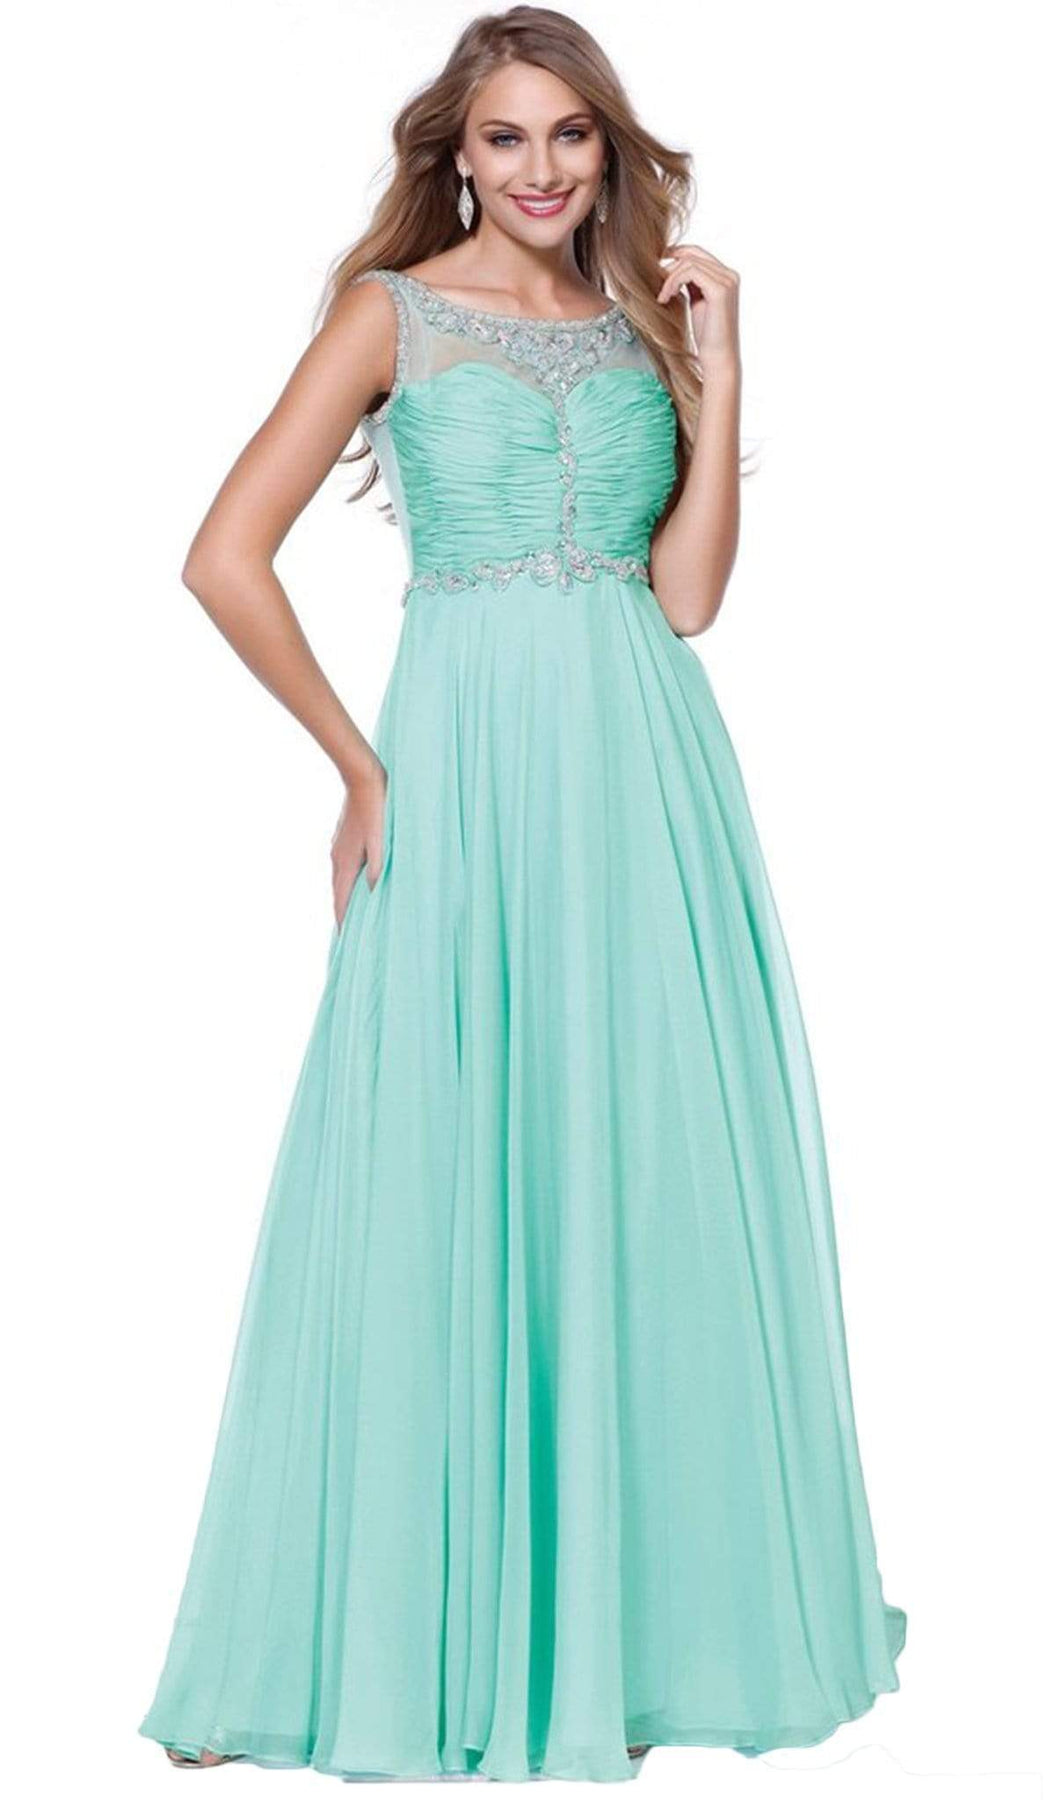 Nox Anabel - 8155 Bateau illusion Chiffon Gown Special Occasion Dress XS / Mint Green